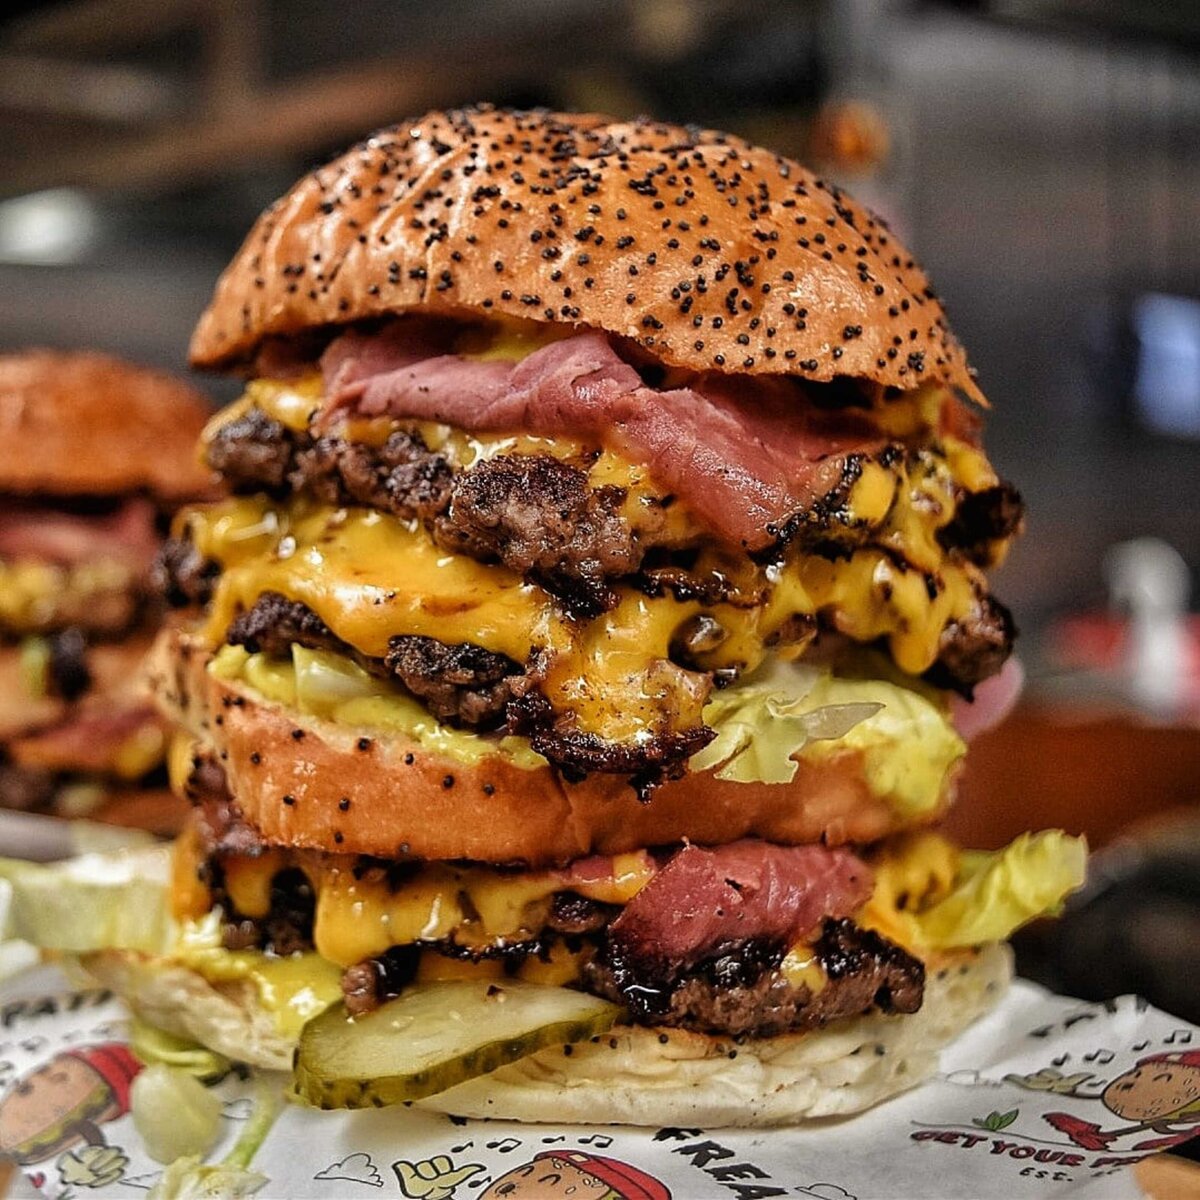 Huge triple stacked burger with bacon, cheese, gherkins and lettuce